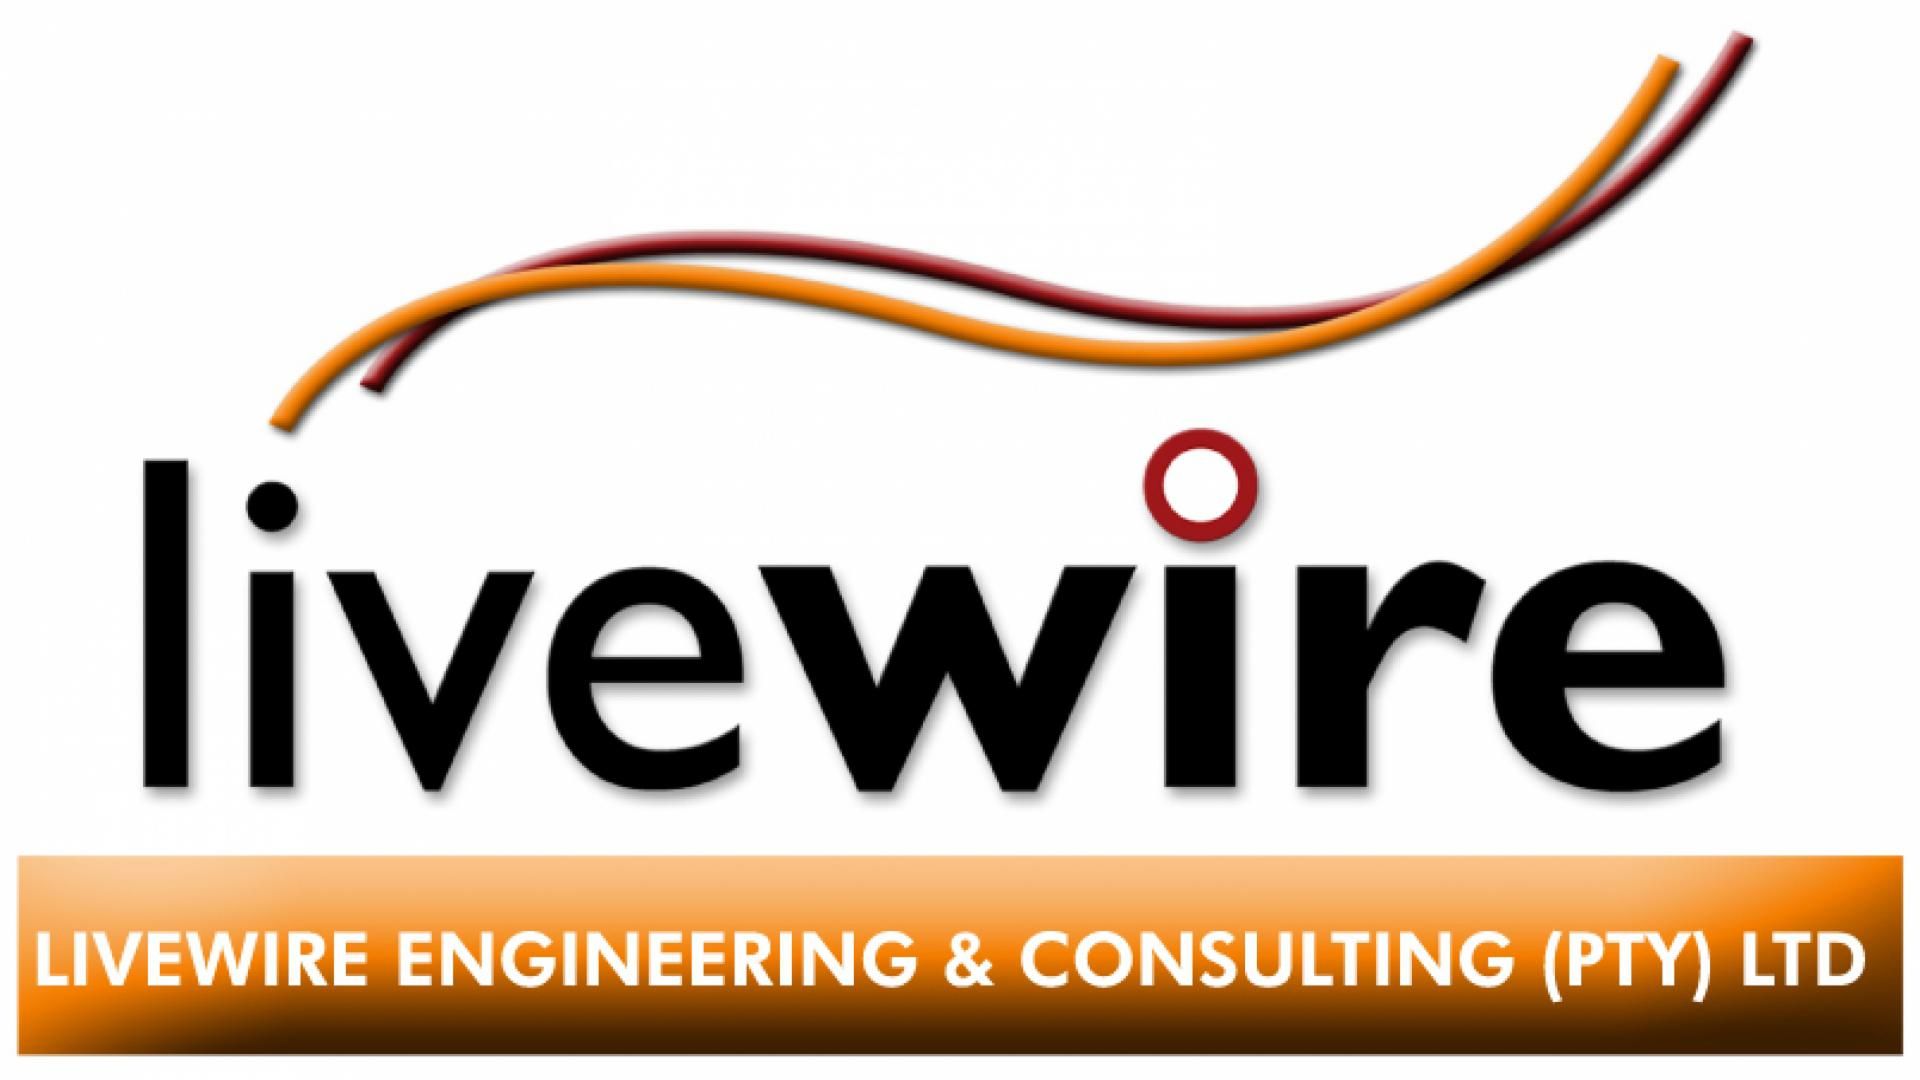 Livewire Engineering & Consulting